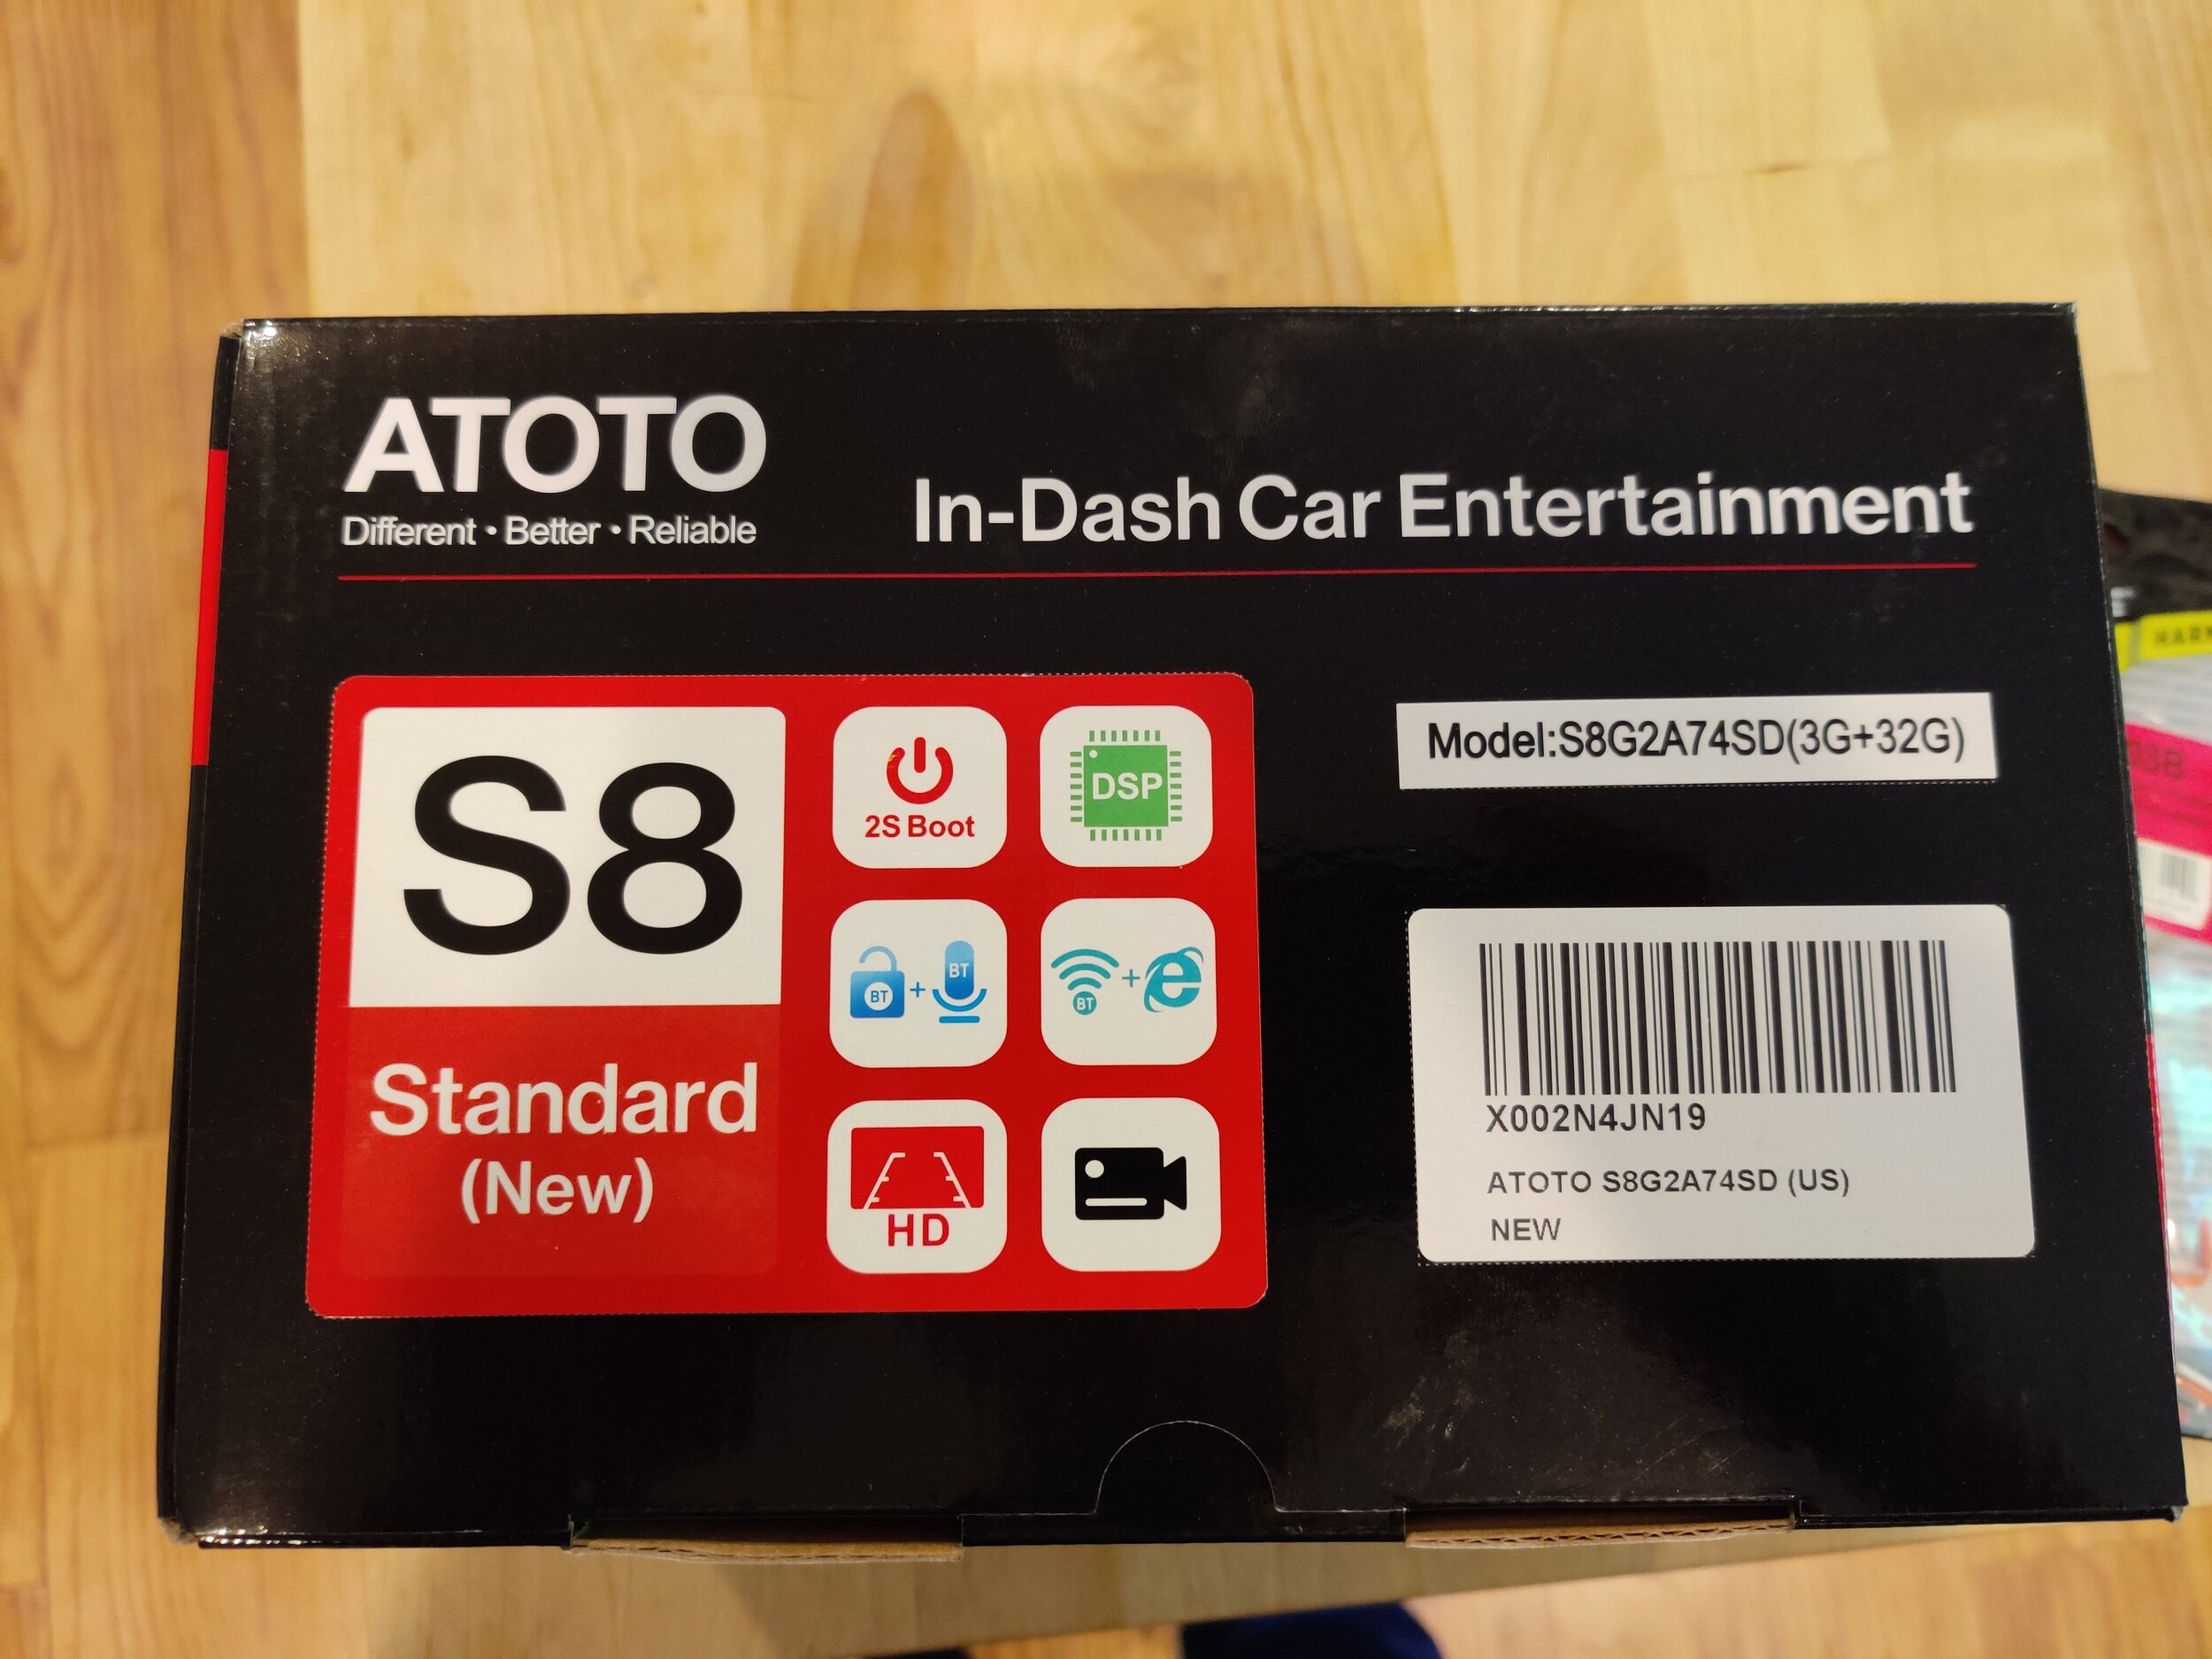 ATOTO S8 Android Headunit - Better than the A6 Pro? Unboxing, Install,  Initial Impressions S8G2A71S 